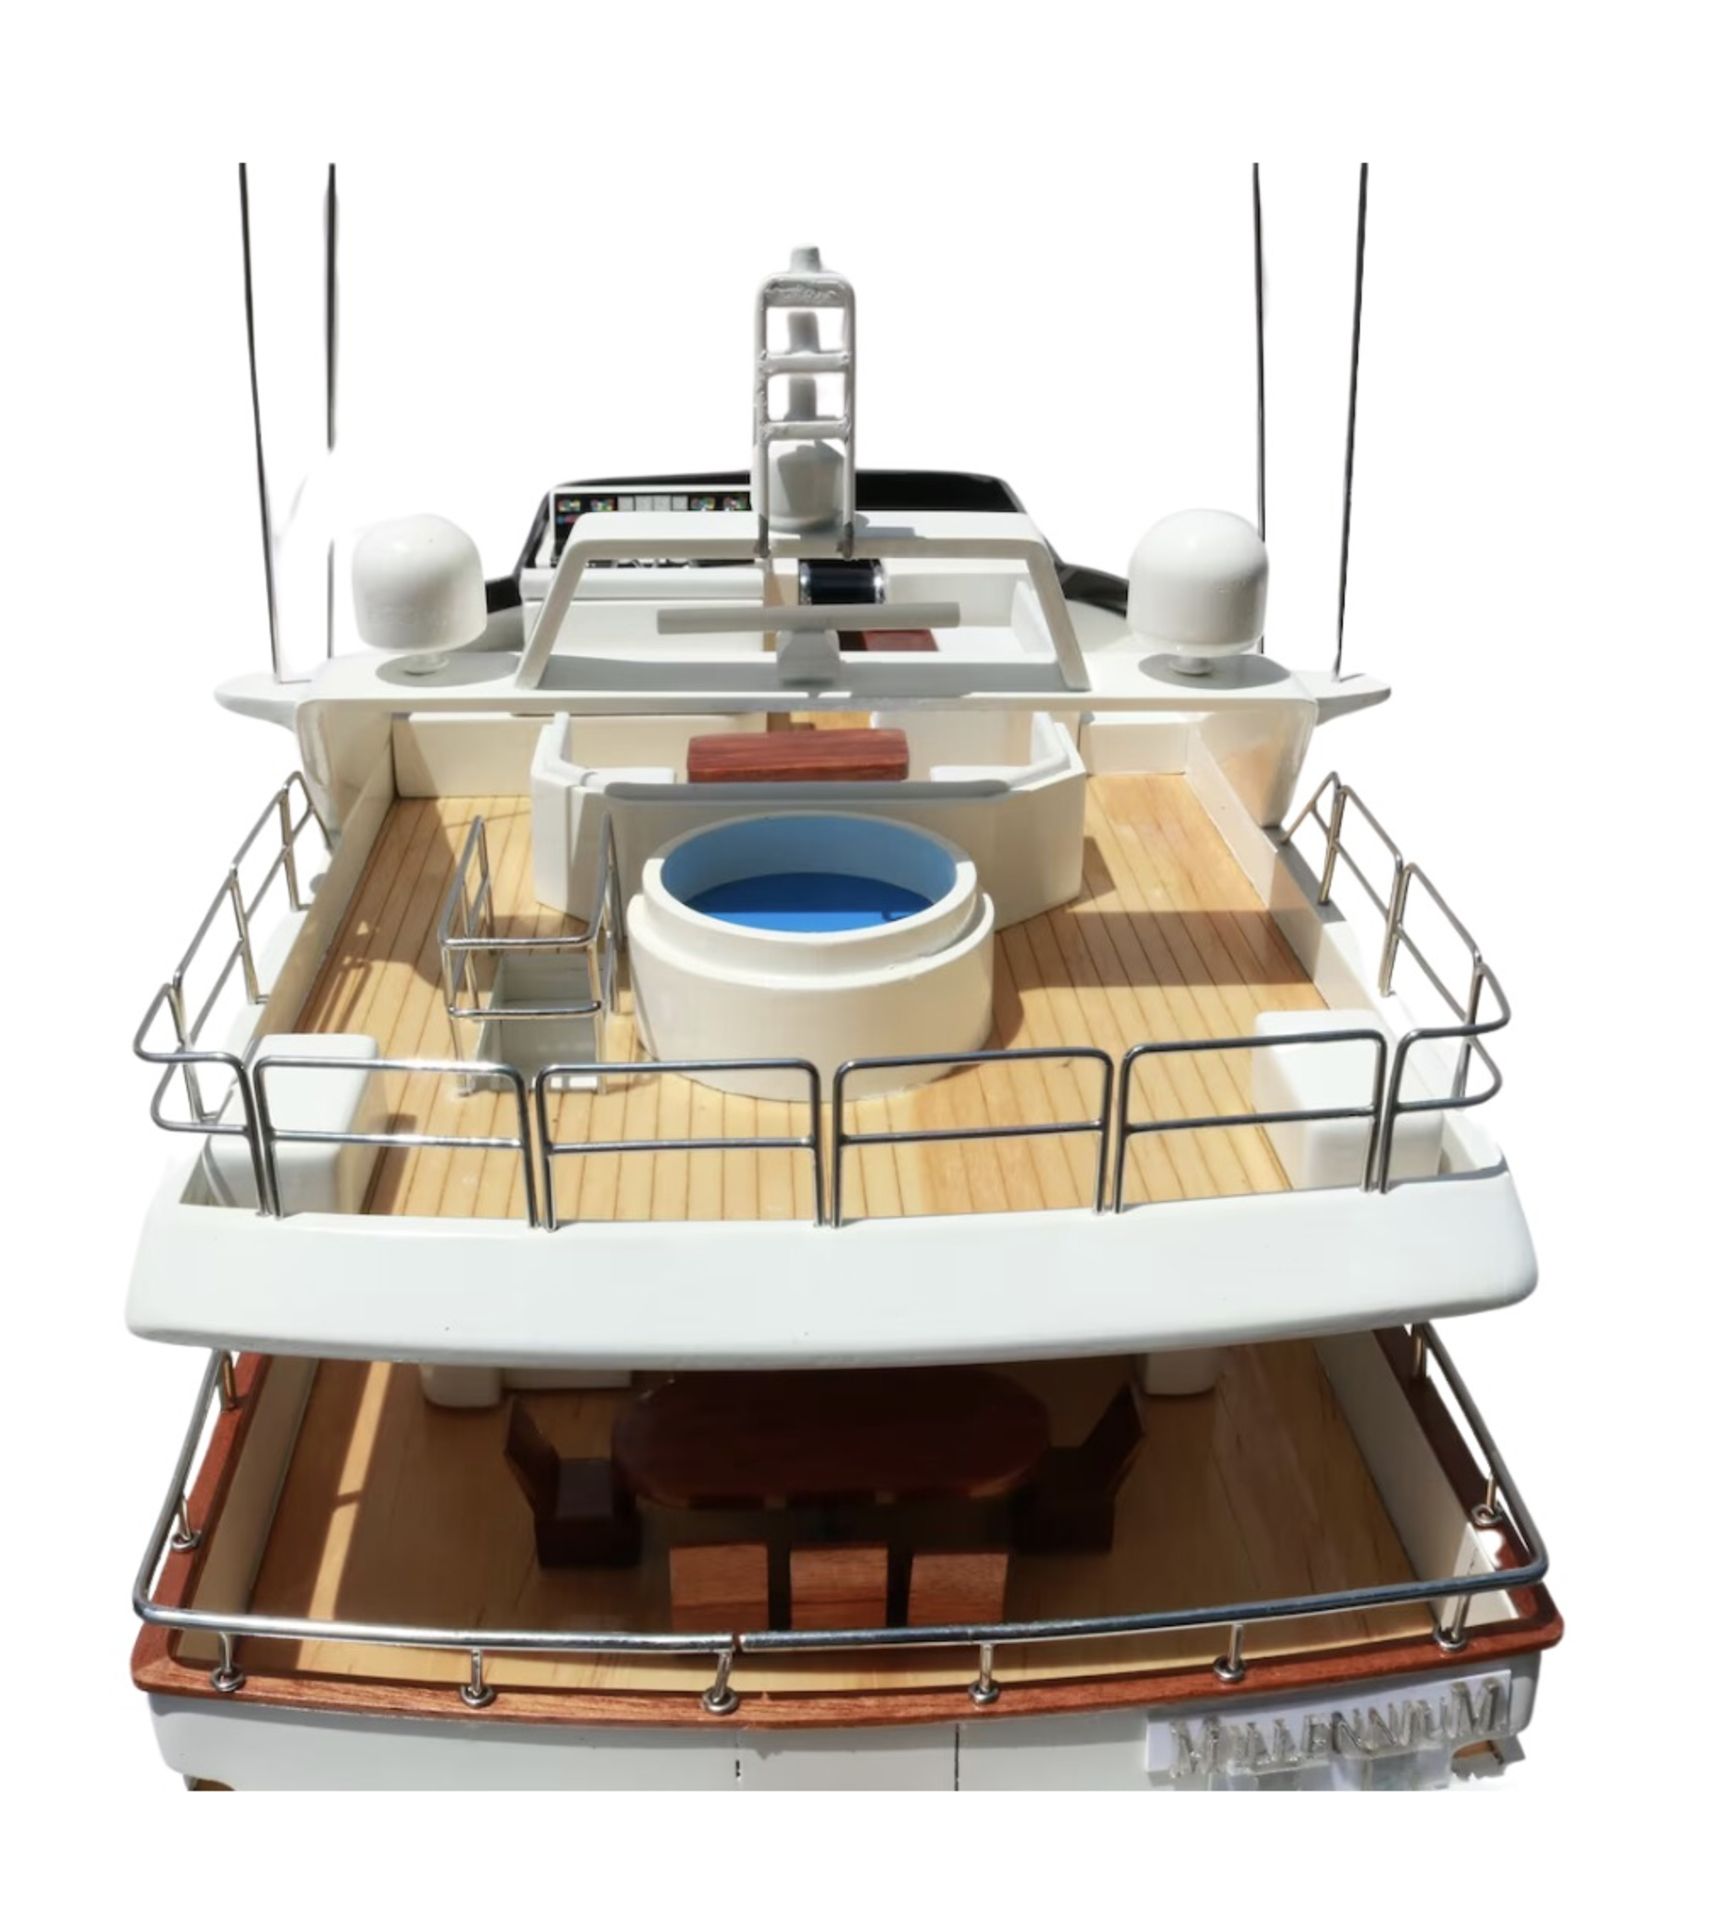 Azimut 100 Yacht Wooden Scale Desk Display - Image 2 of 8